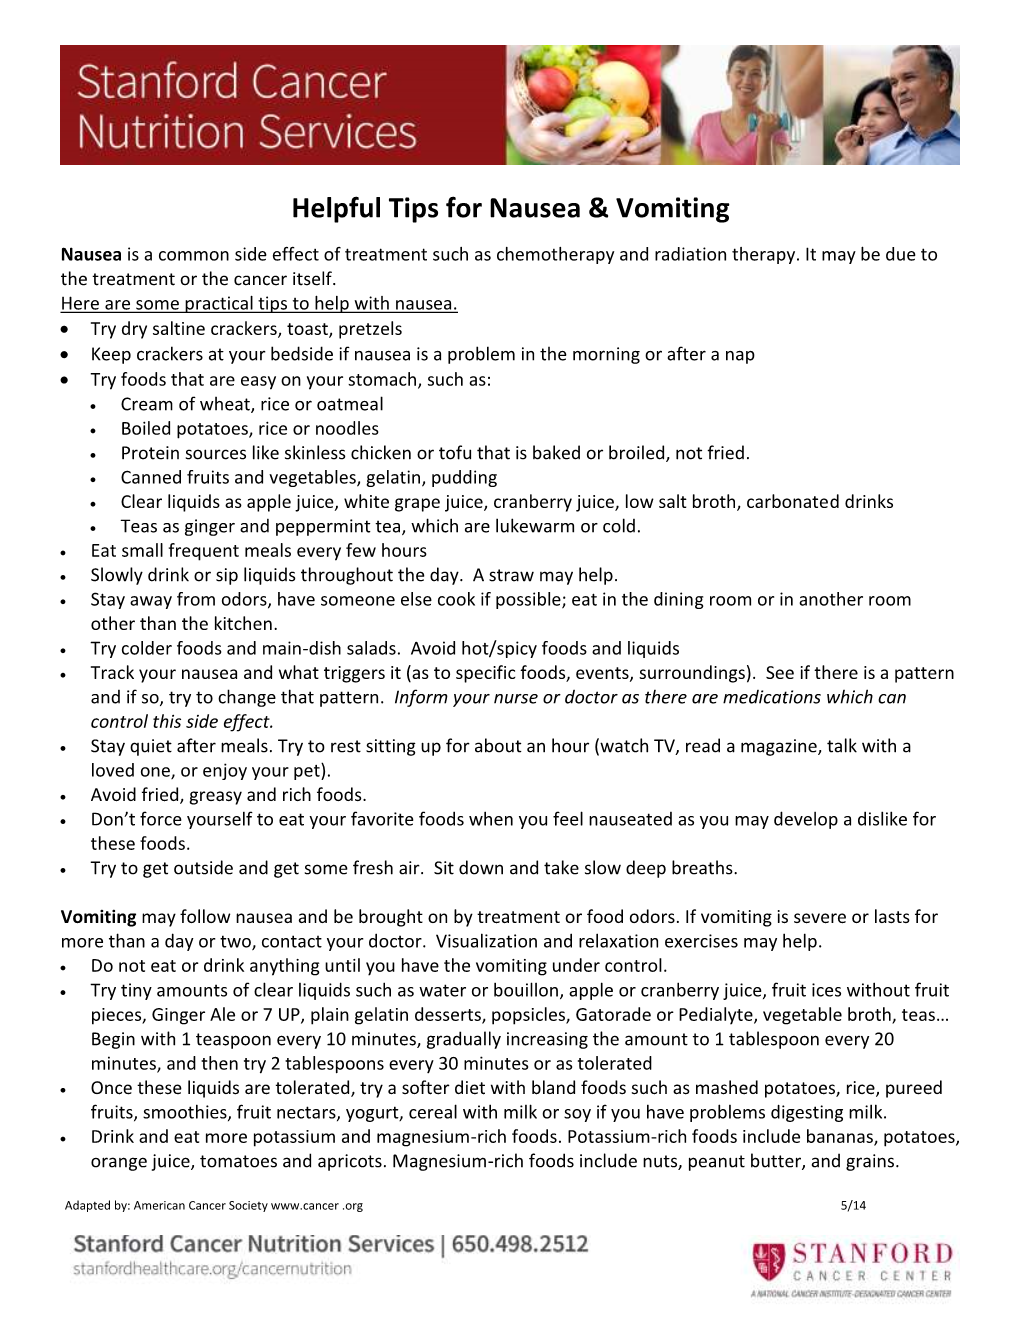 Helpful Tips for Nausea & Vomiting